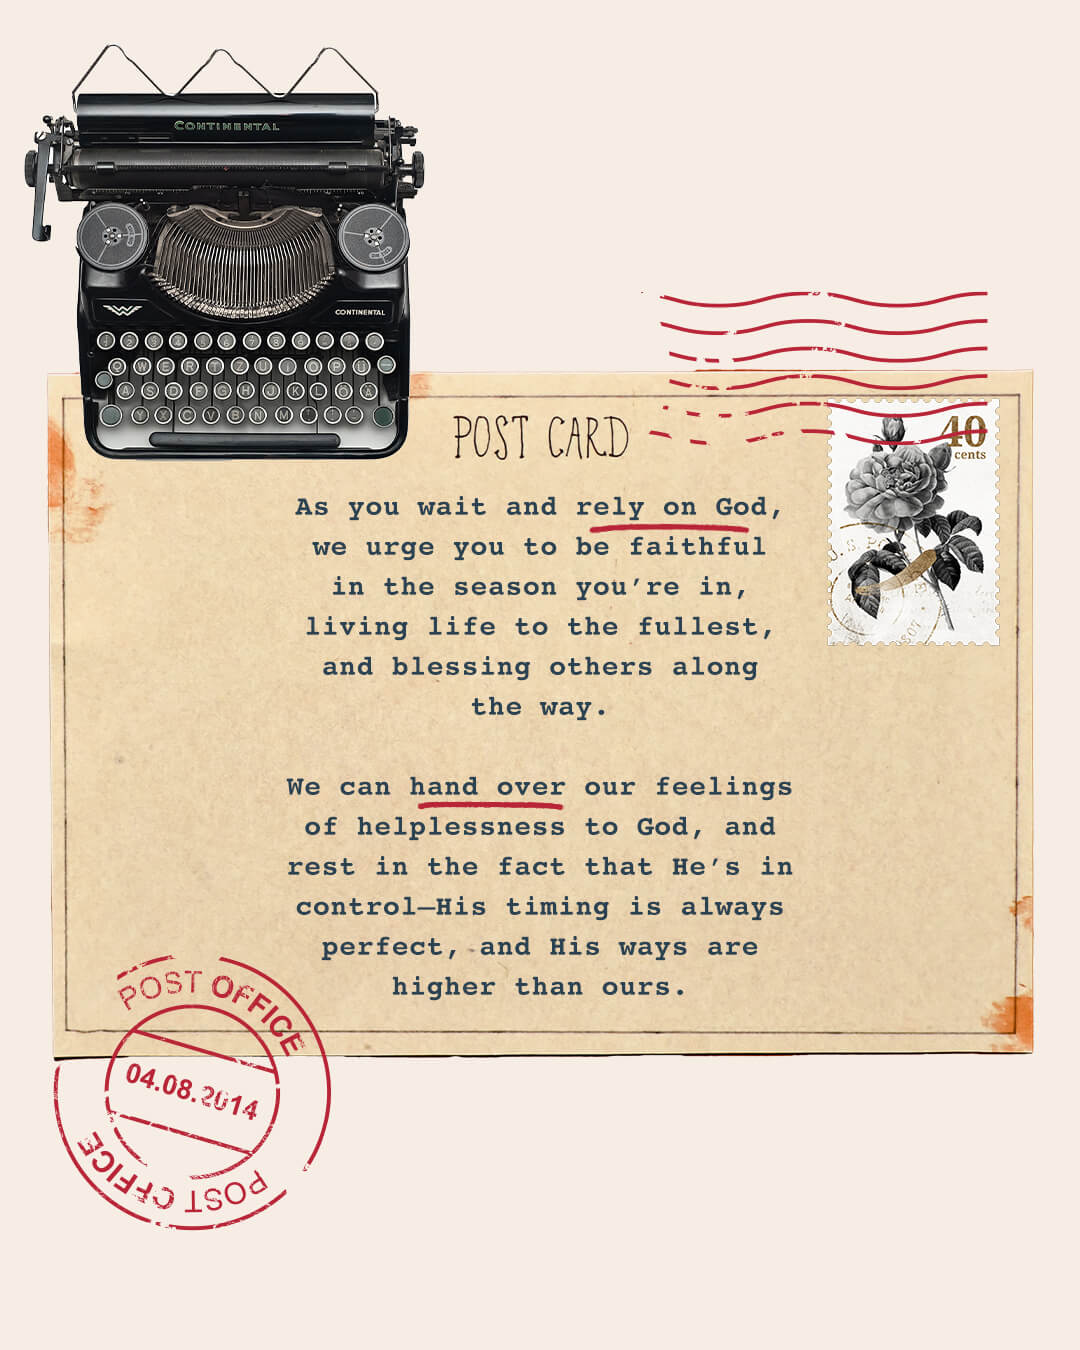 Image of a typewriter and a postcard